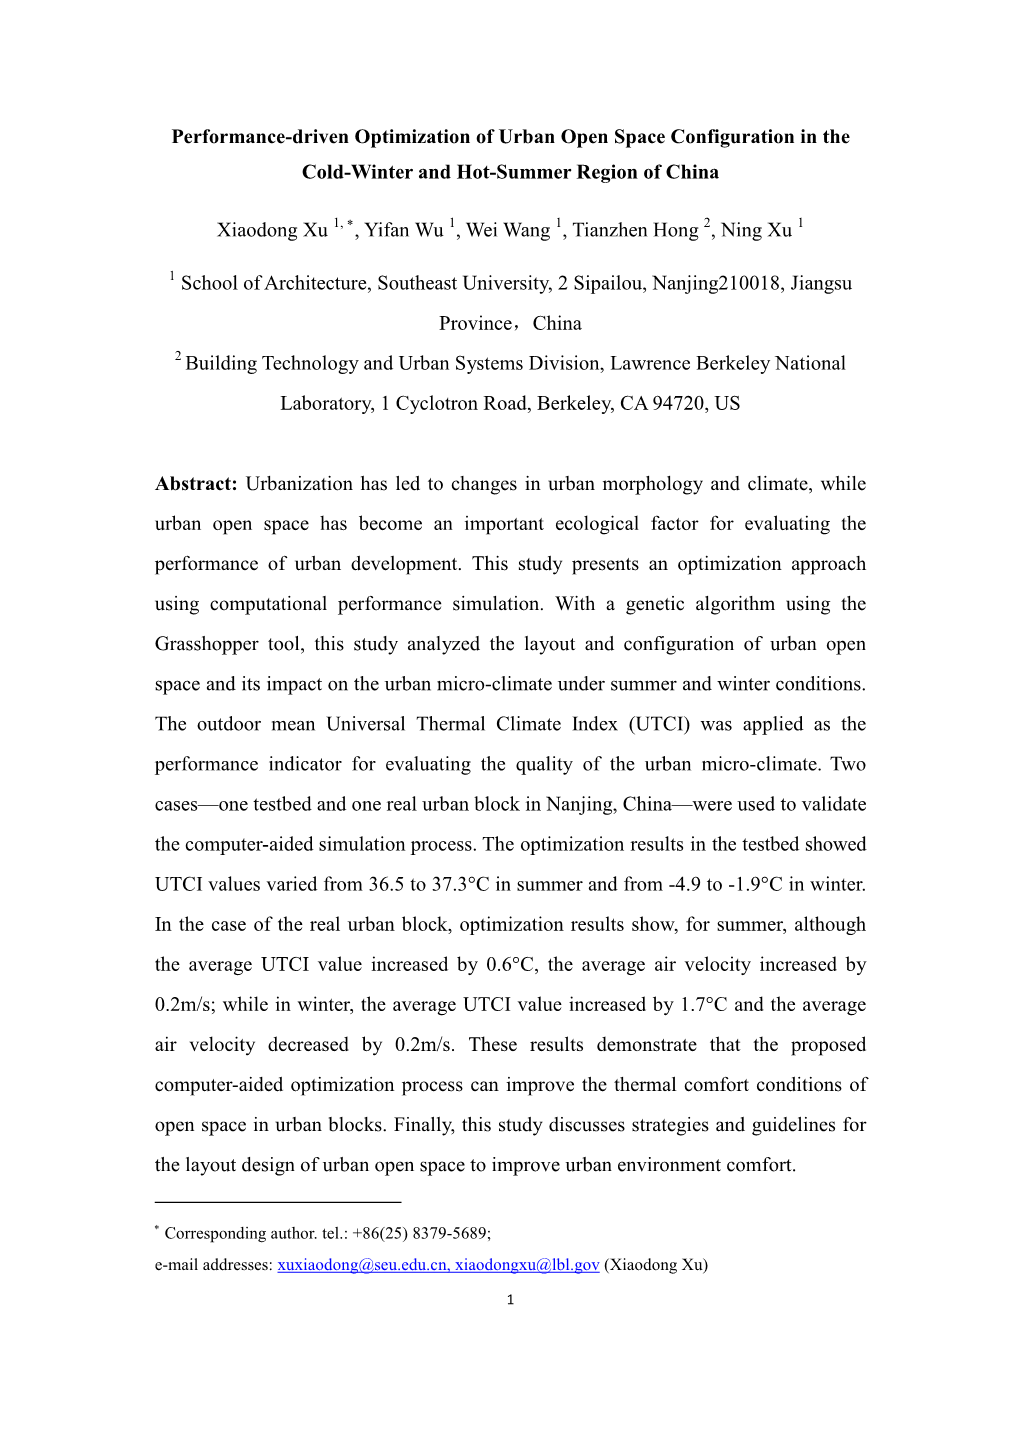 Performance-Driven Optimization of Urban Open Space Configuration in the Cold-Winter and Hot-Summer Region of China